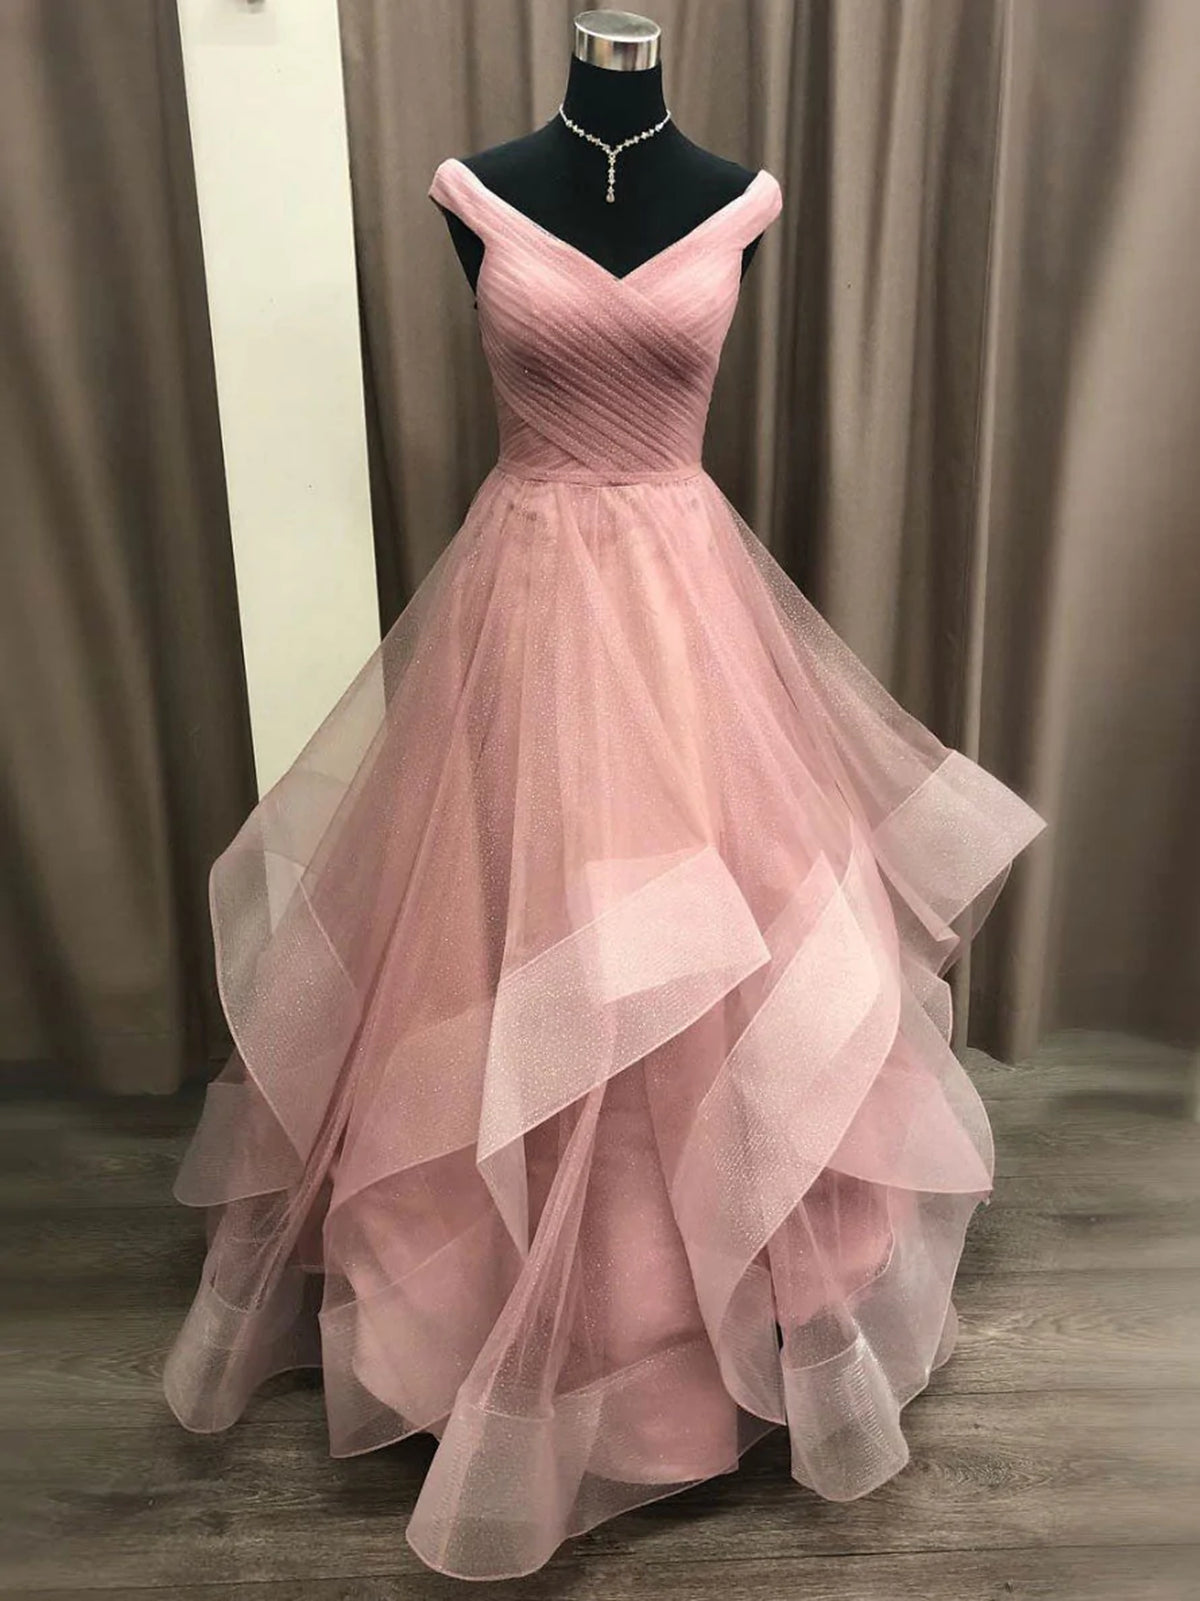 Off the Shoulder Light Pink Corset Prom Dresses, Off Shoulder Light Pink Corset Formal Evening Dresses outfit, Party Dress For Teen